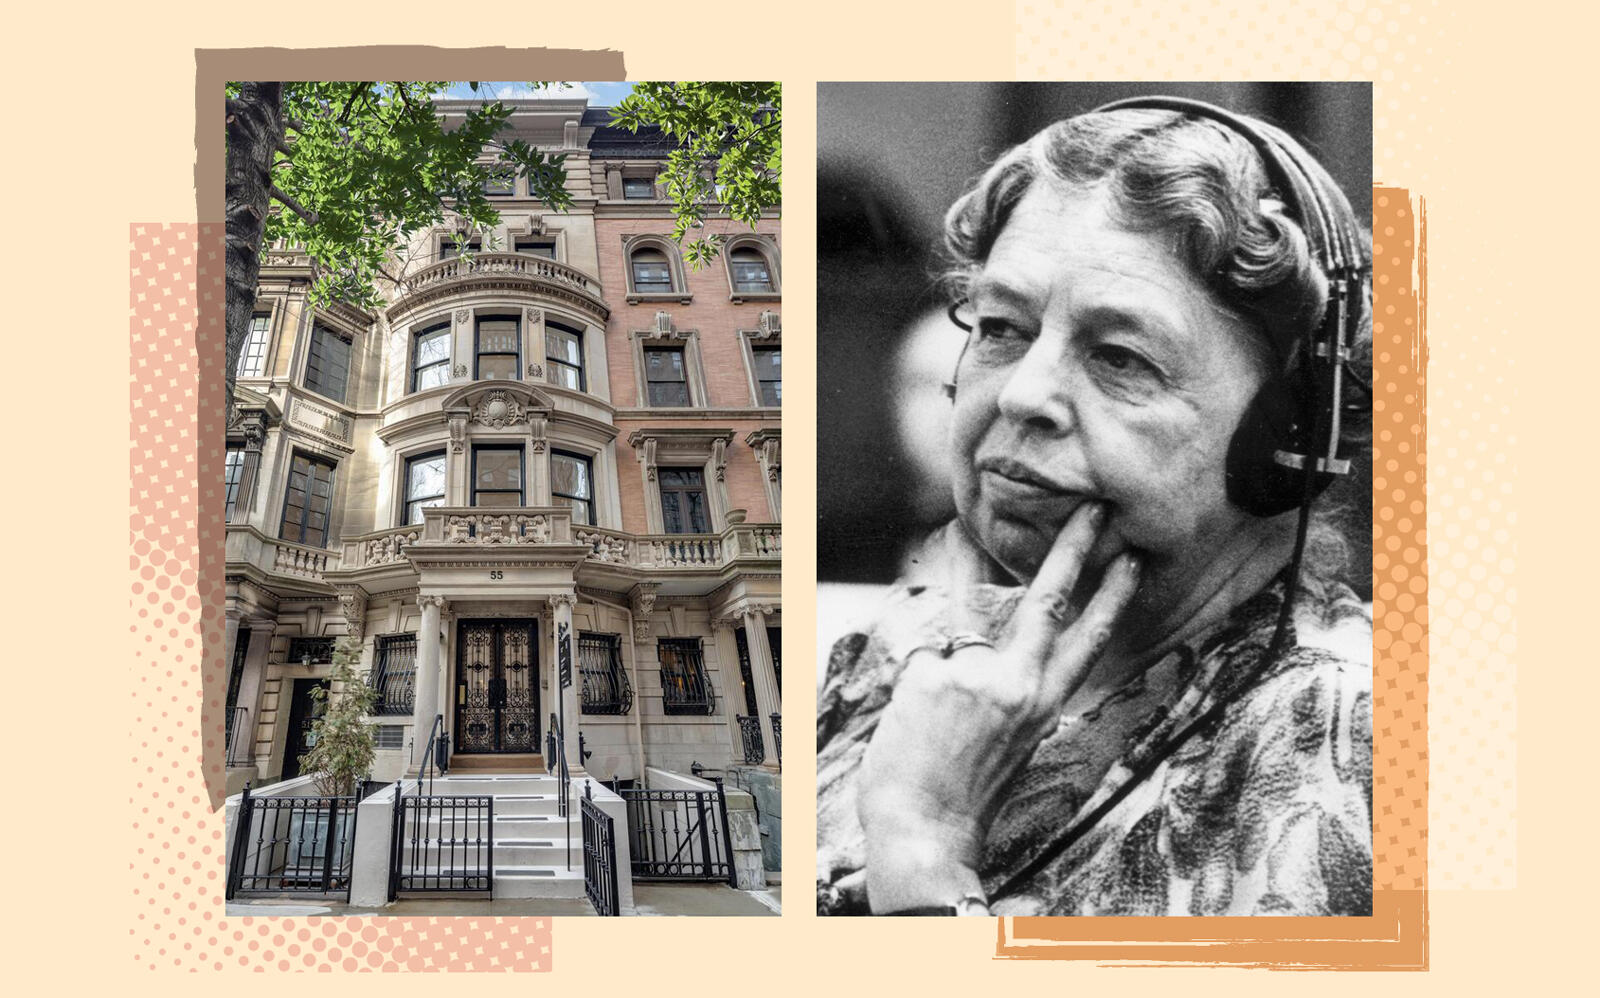 55 East 74th Street and Eleanor Roosevelt (Compass, Getty)